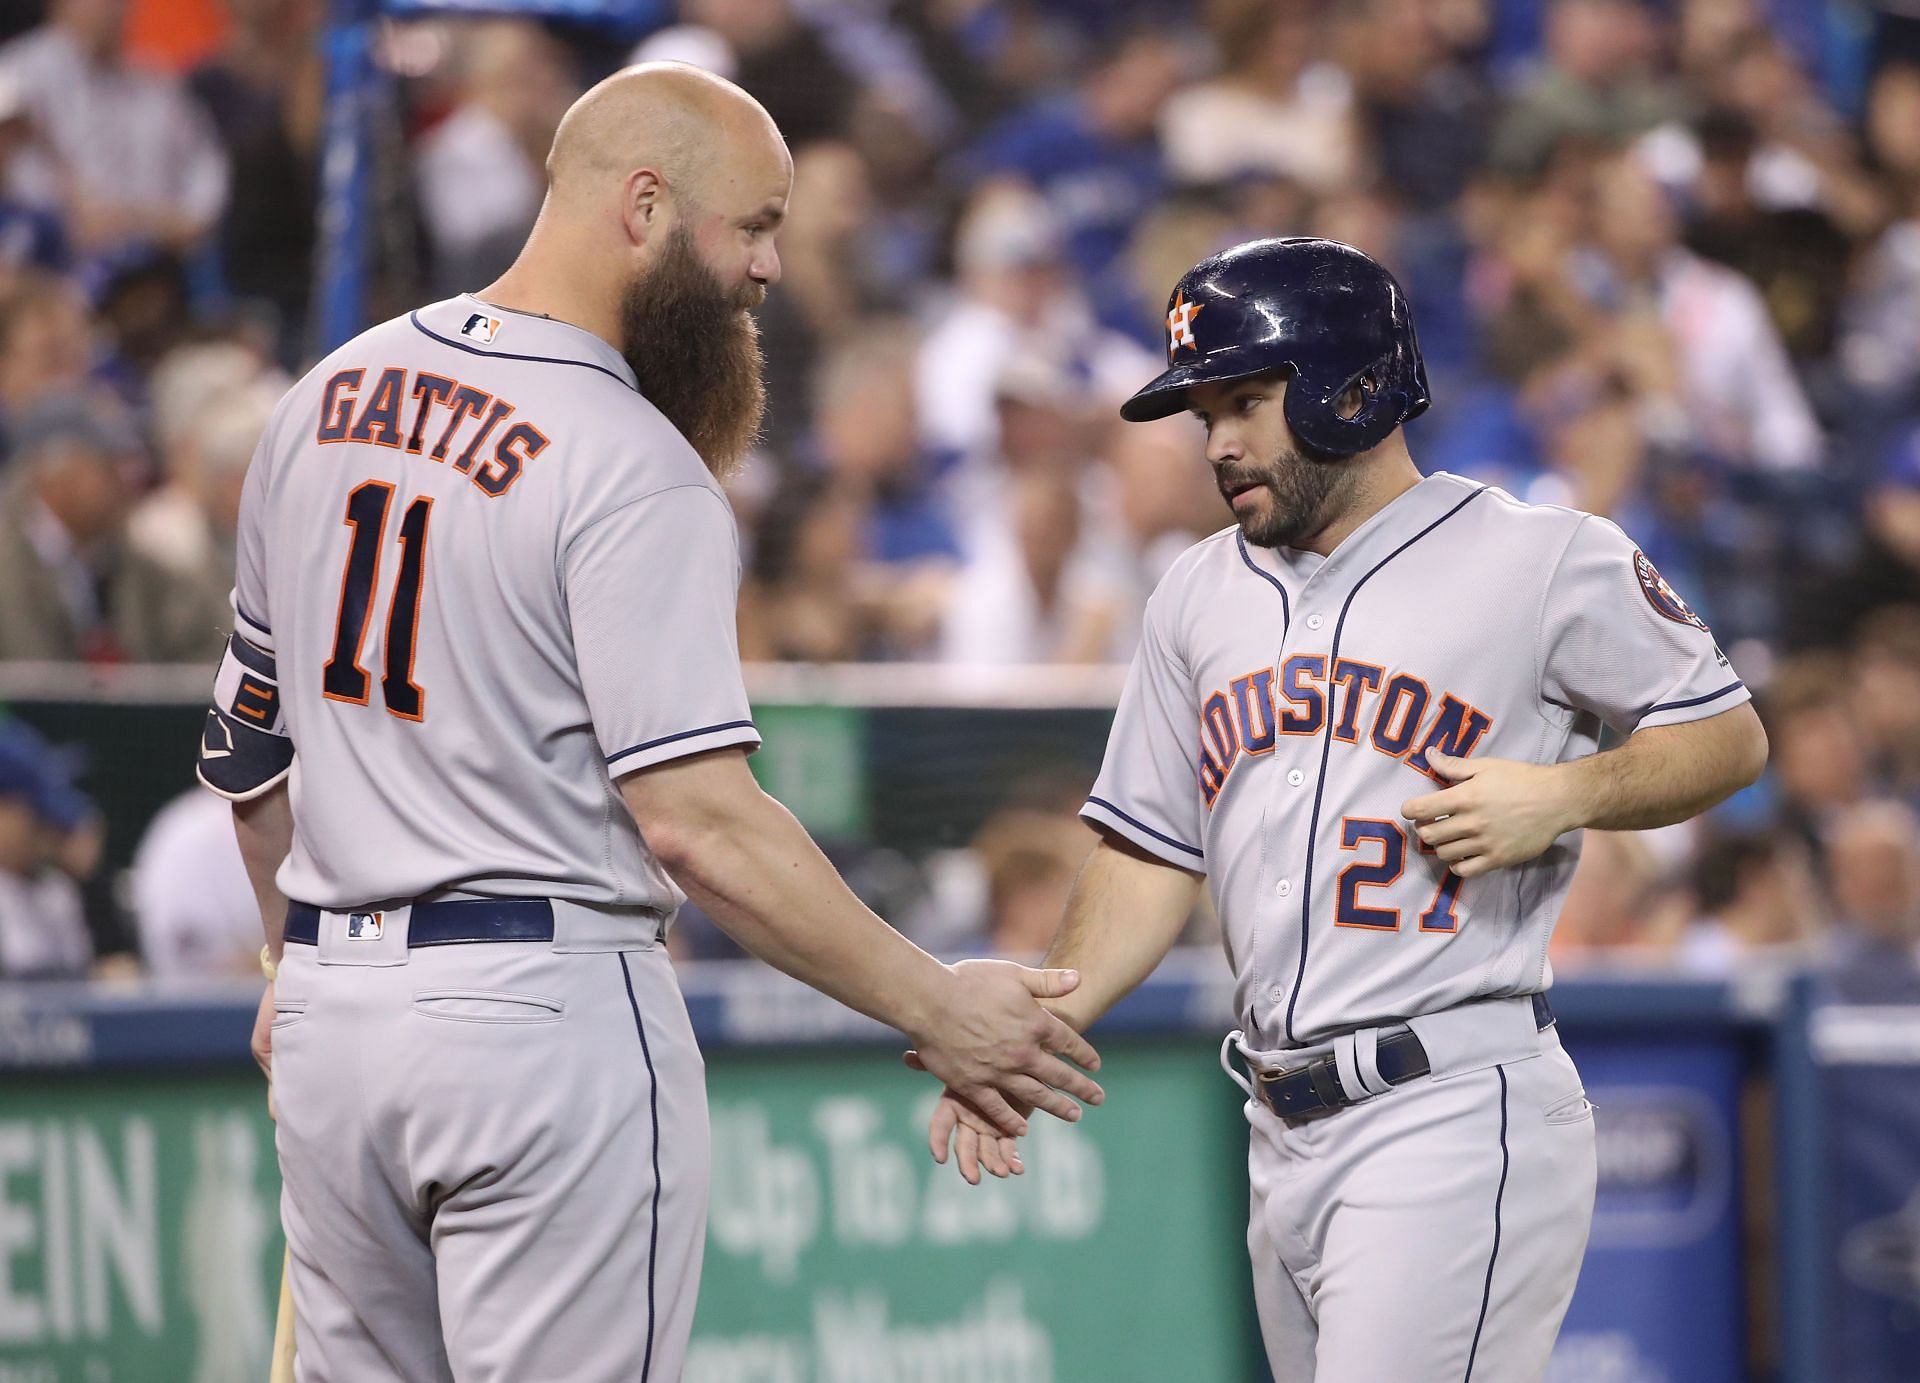 Jose Altuve, right, of the Houston Astros is congratulated by Evan Gattis.